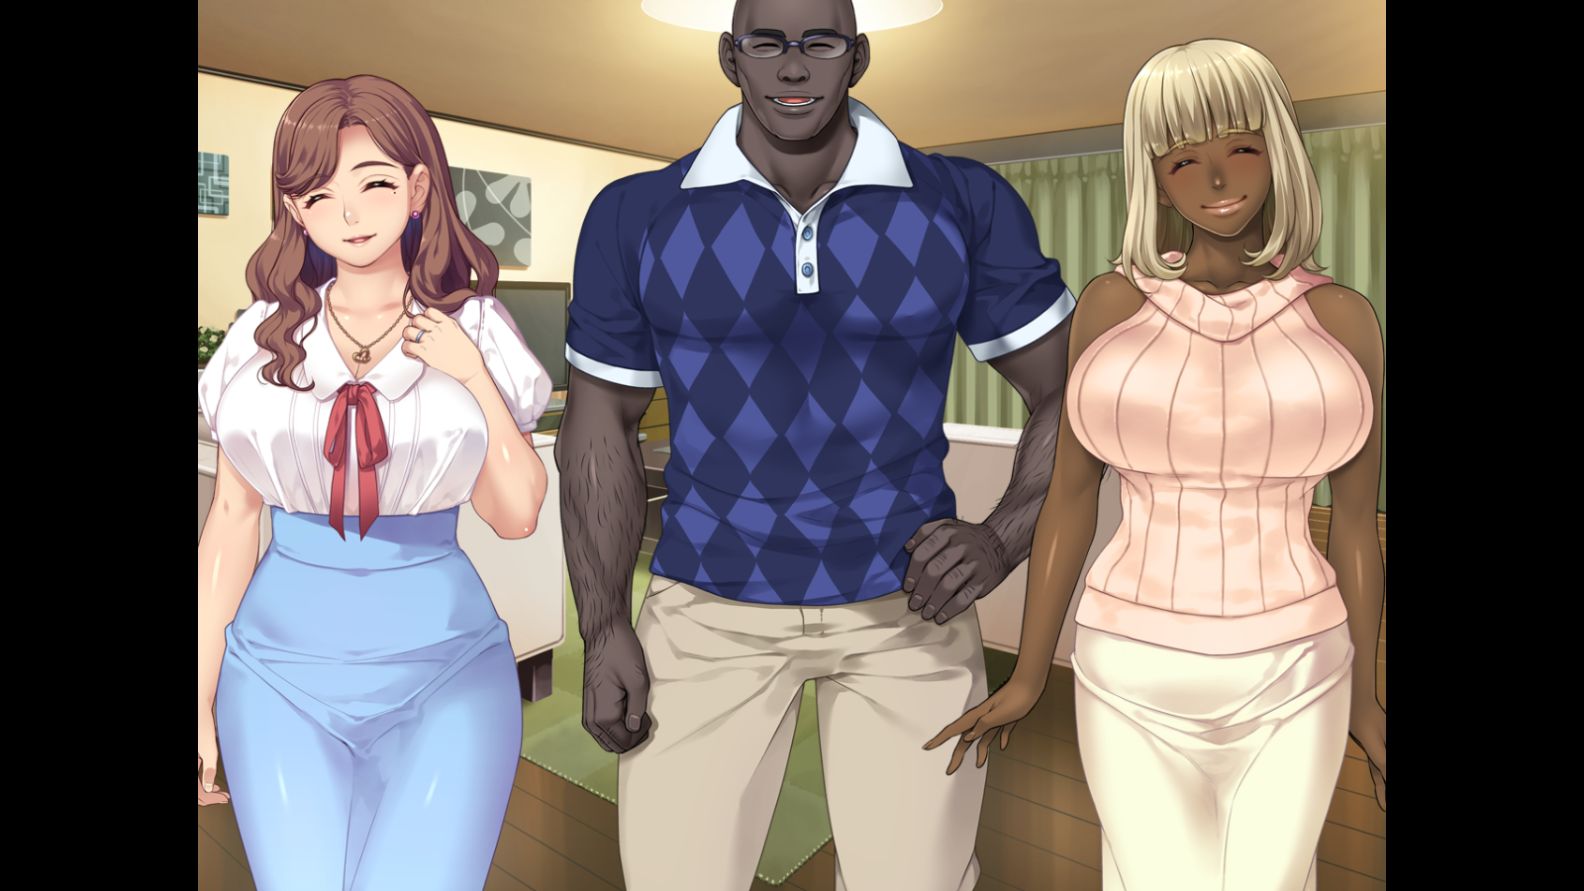 Big Black Cock and Big Black Butt and My Sweet Wife Swinger Hentai Game developed by OrcSoft (25)